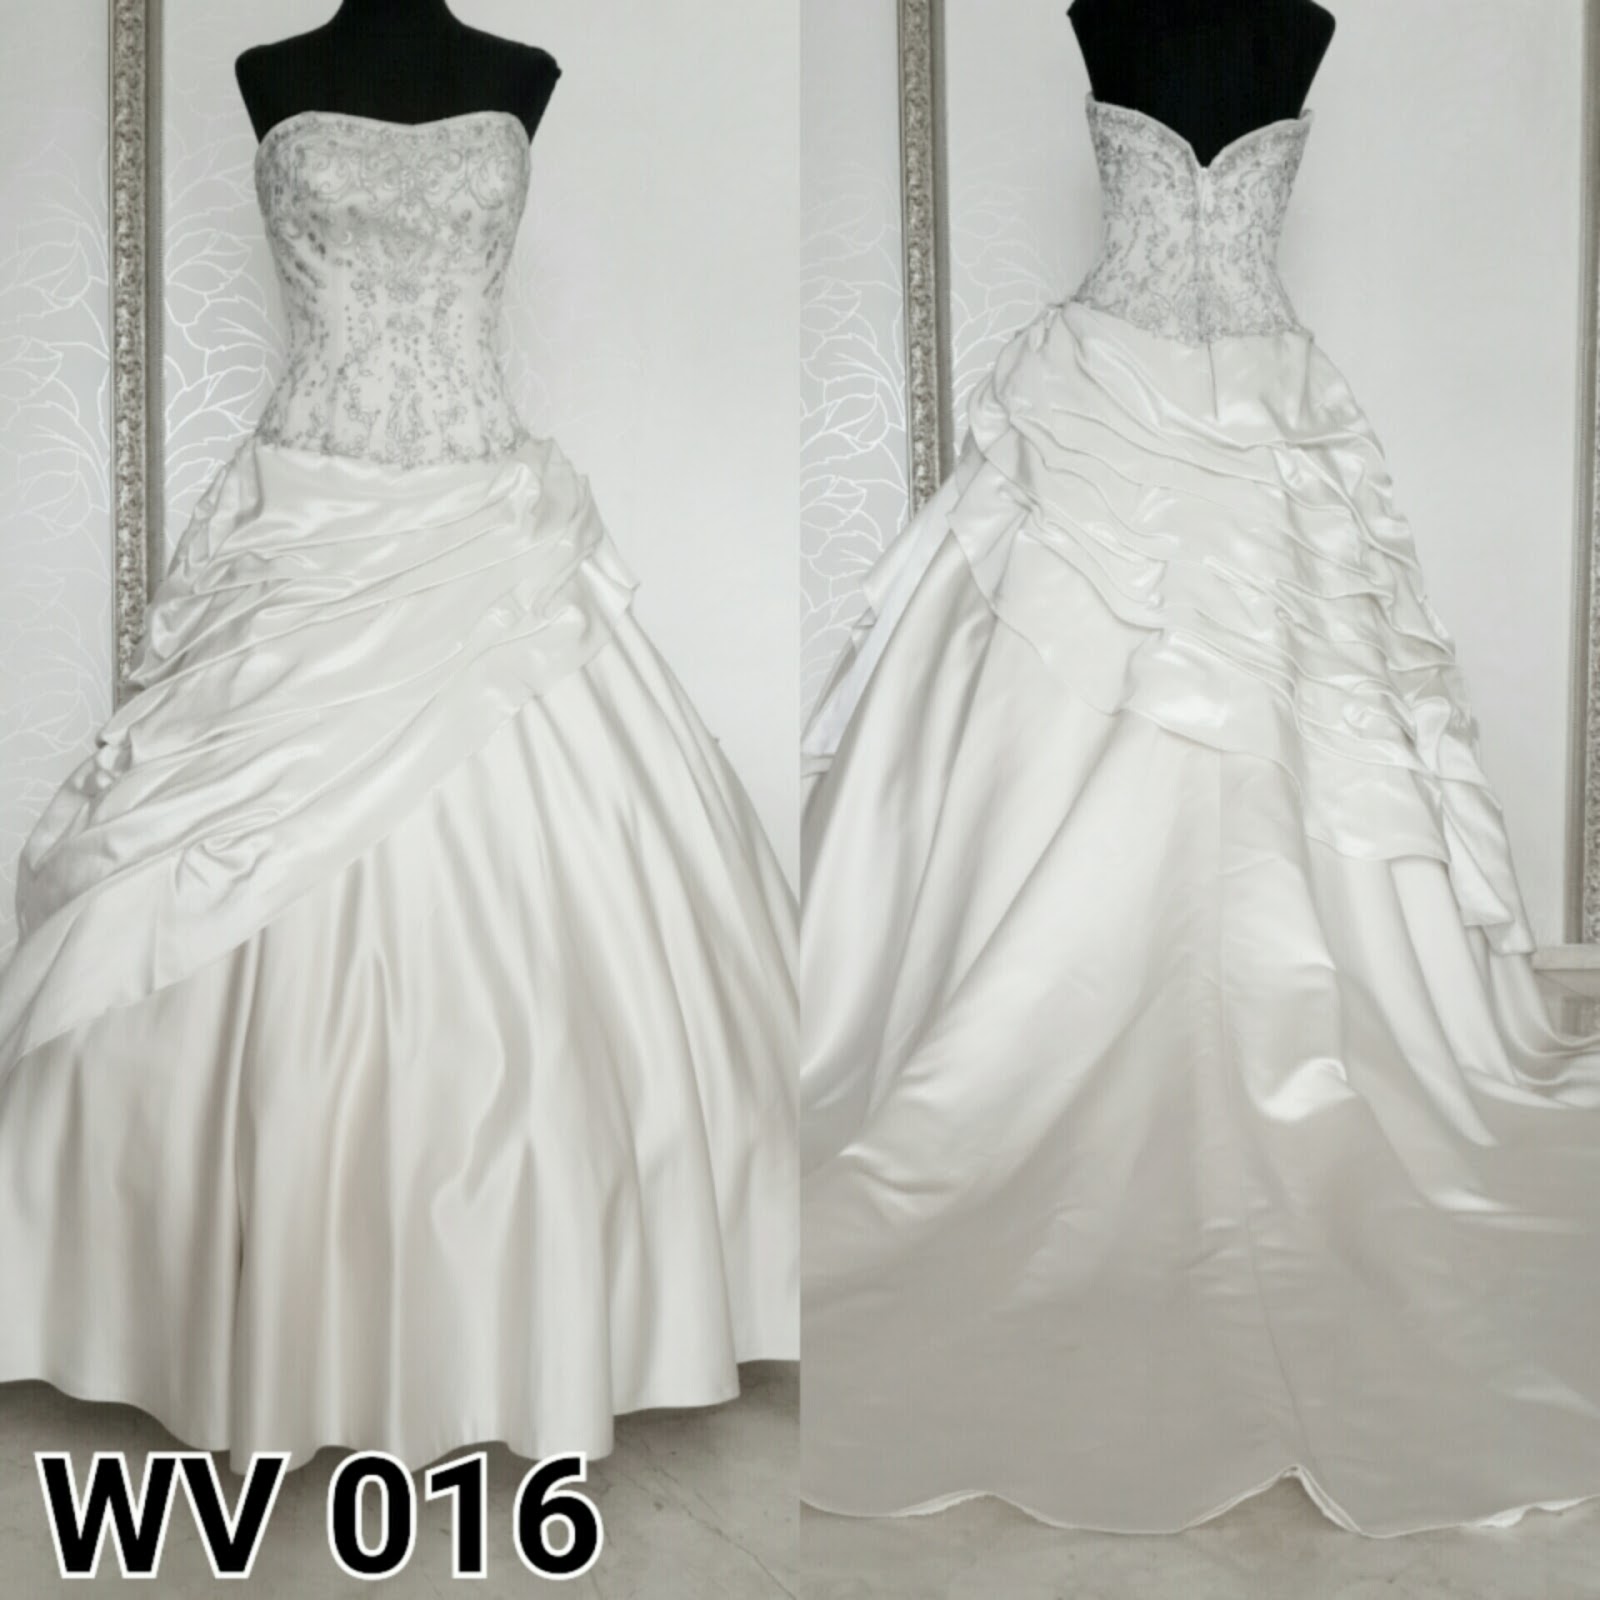 JUAL WEDDING GOWN IMPORT HIGH QUALITY PO WEDDING GOWN 